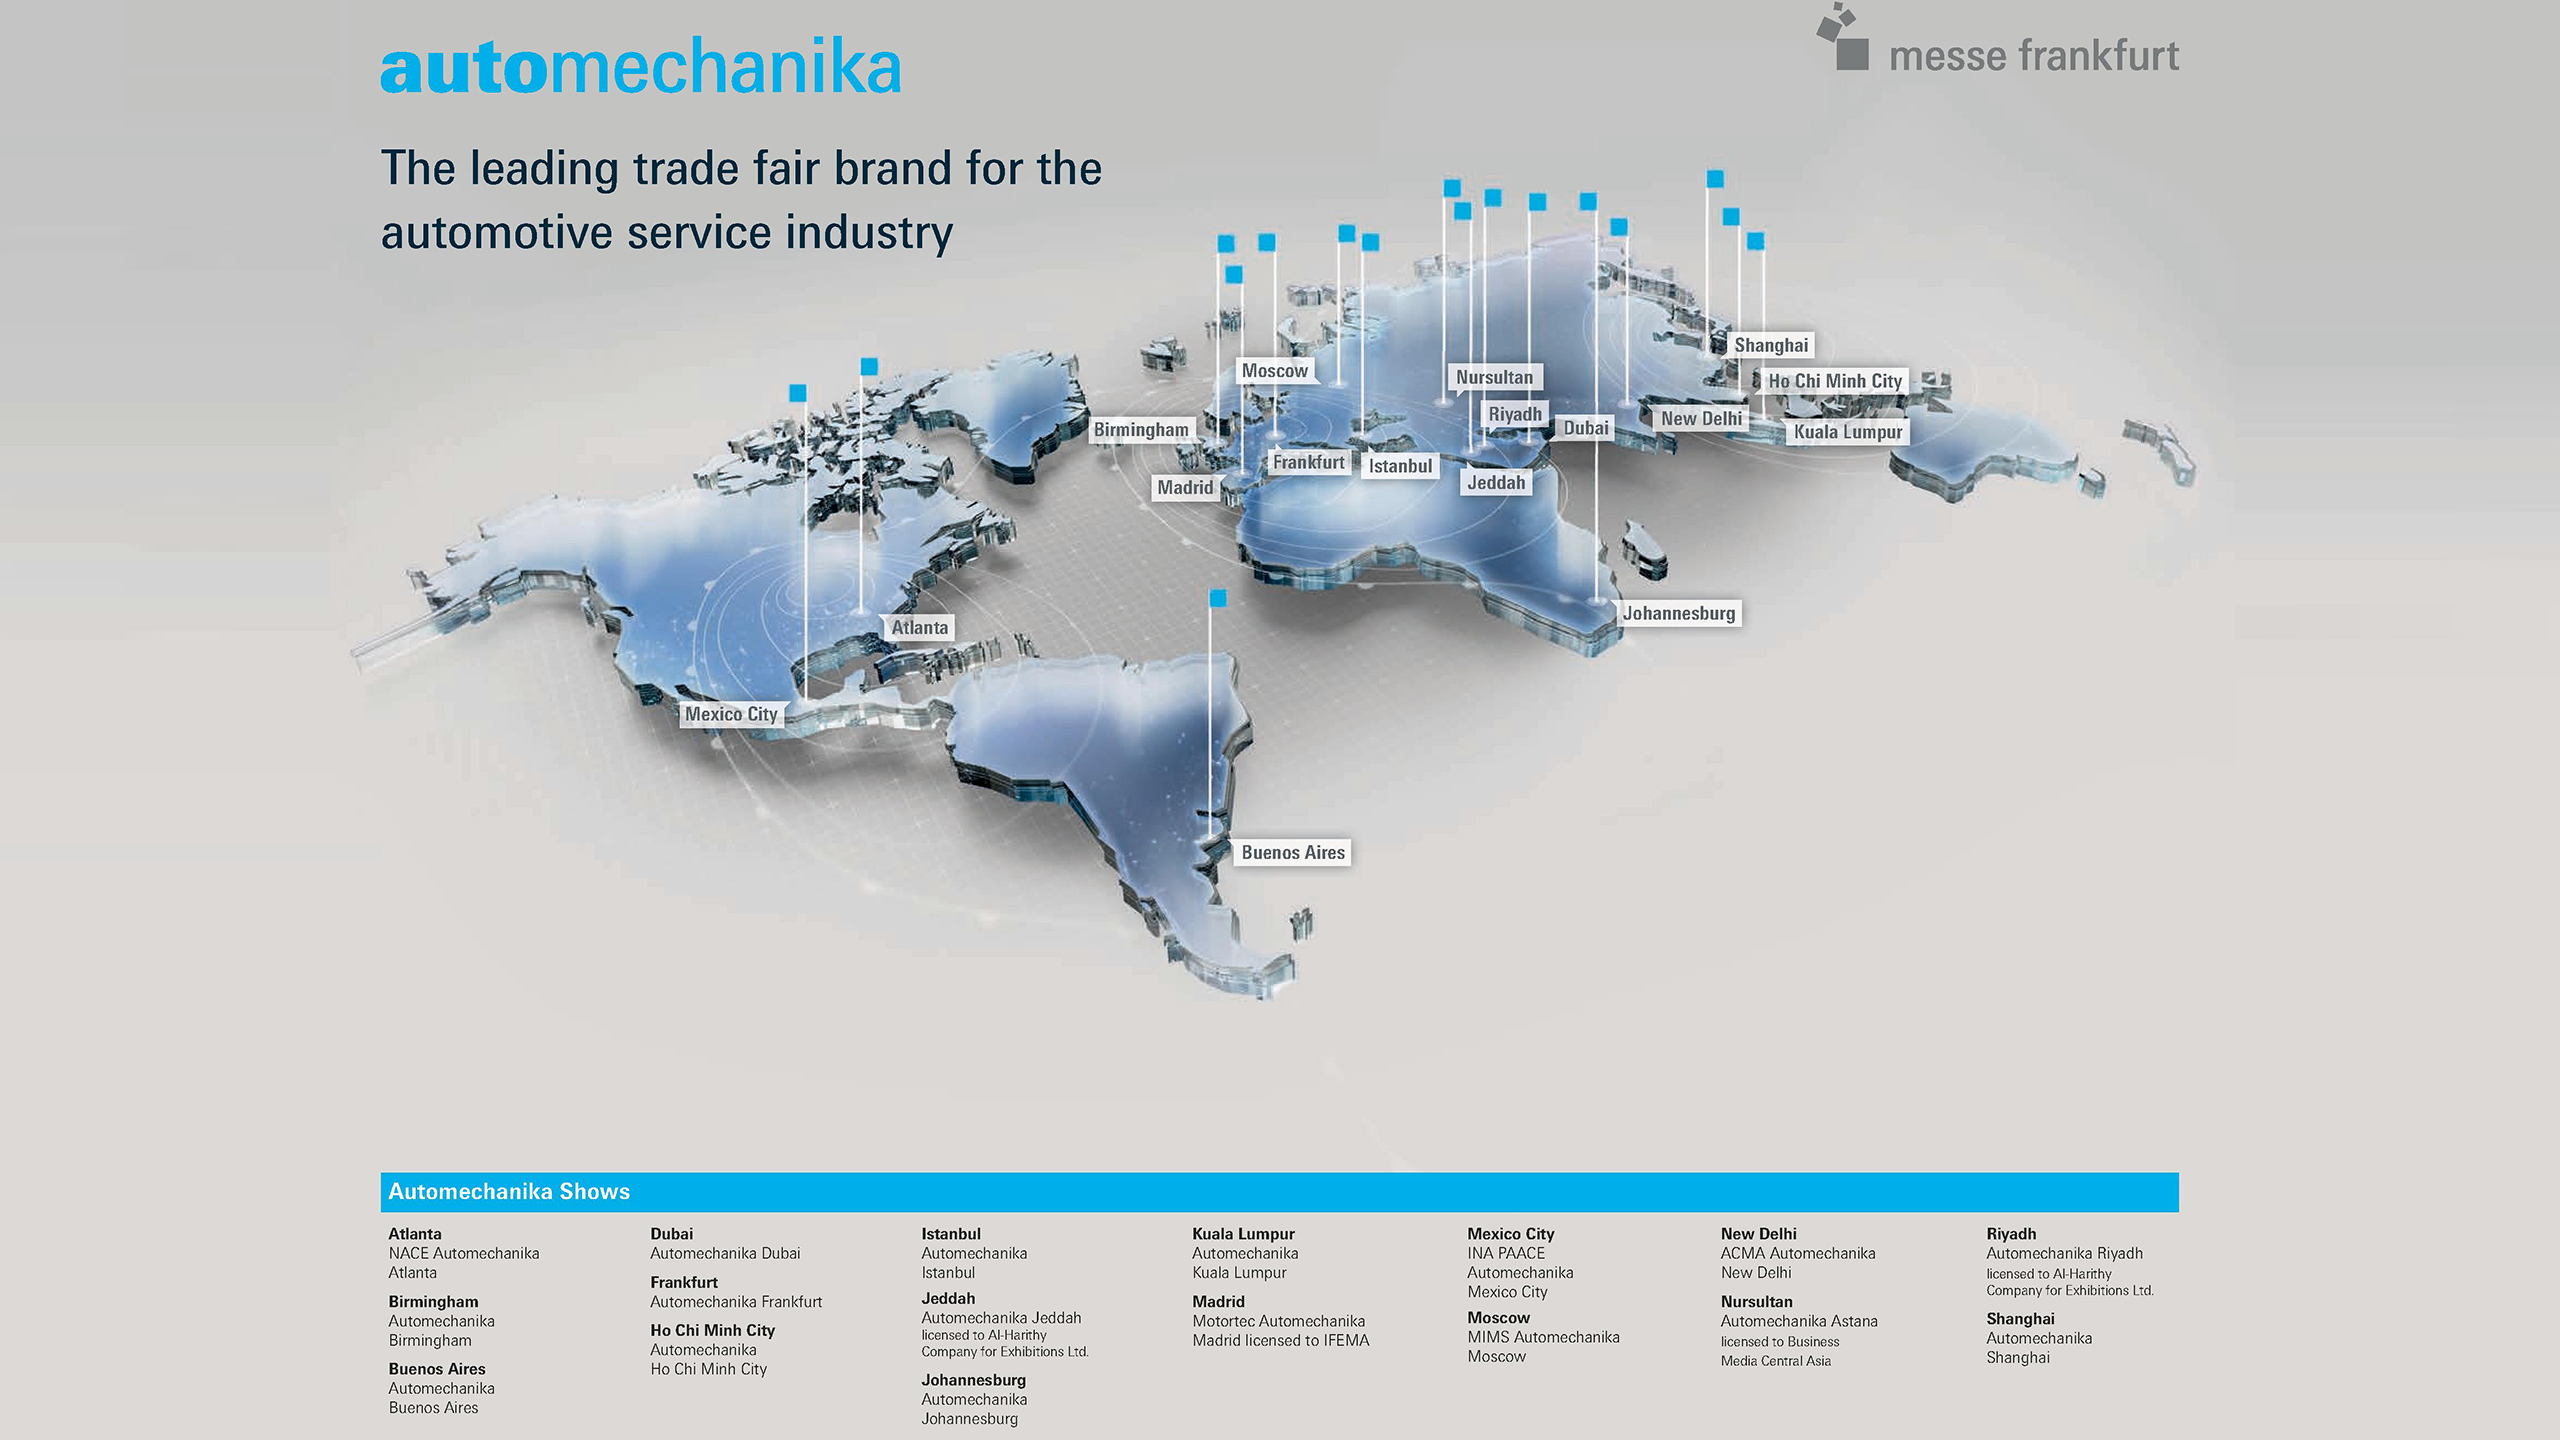 Automechanika: An international network of 16 events in 15 countries.